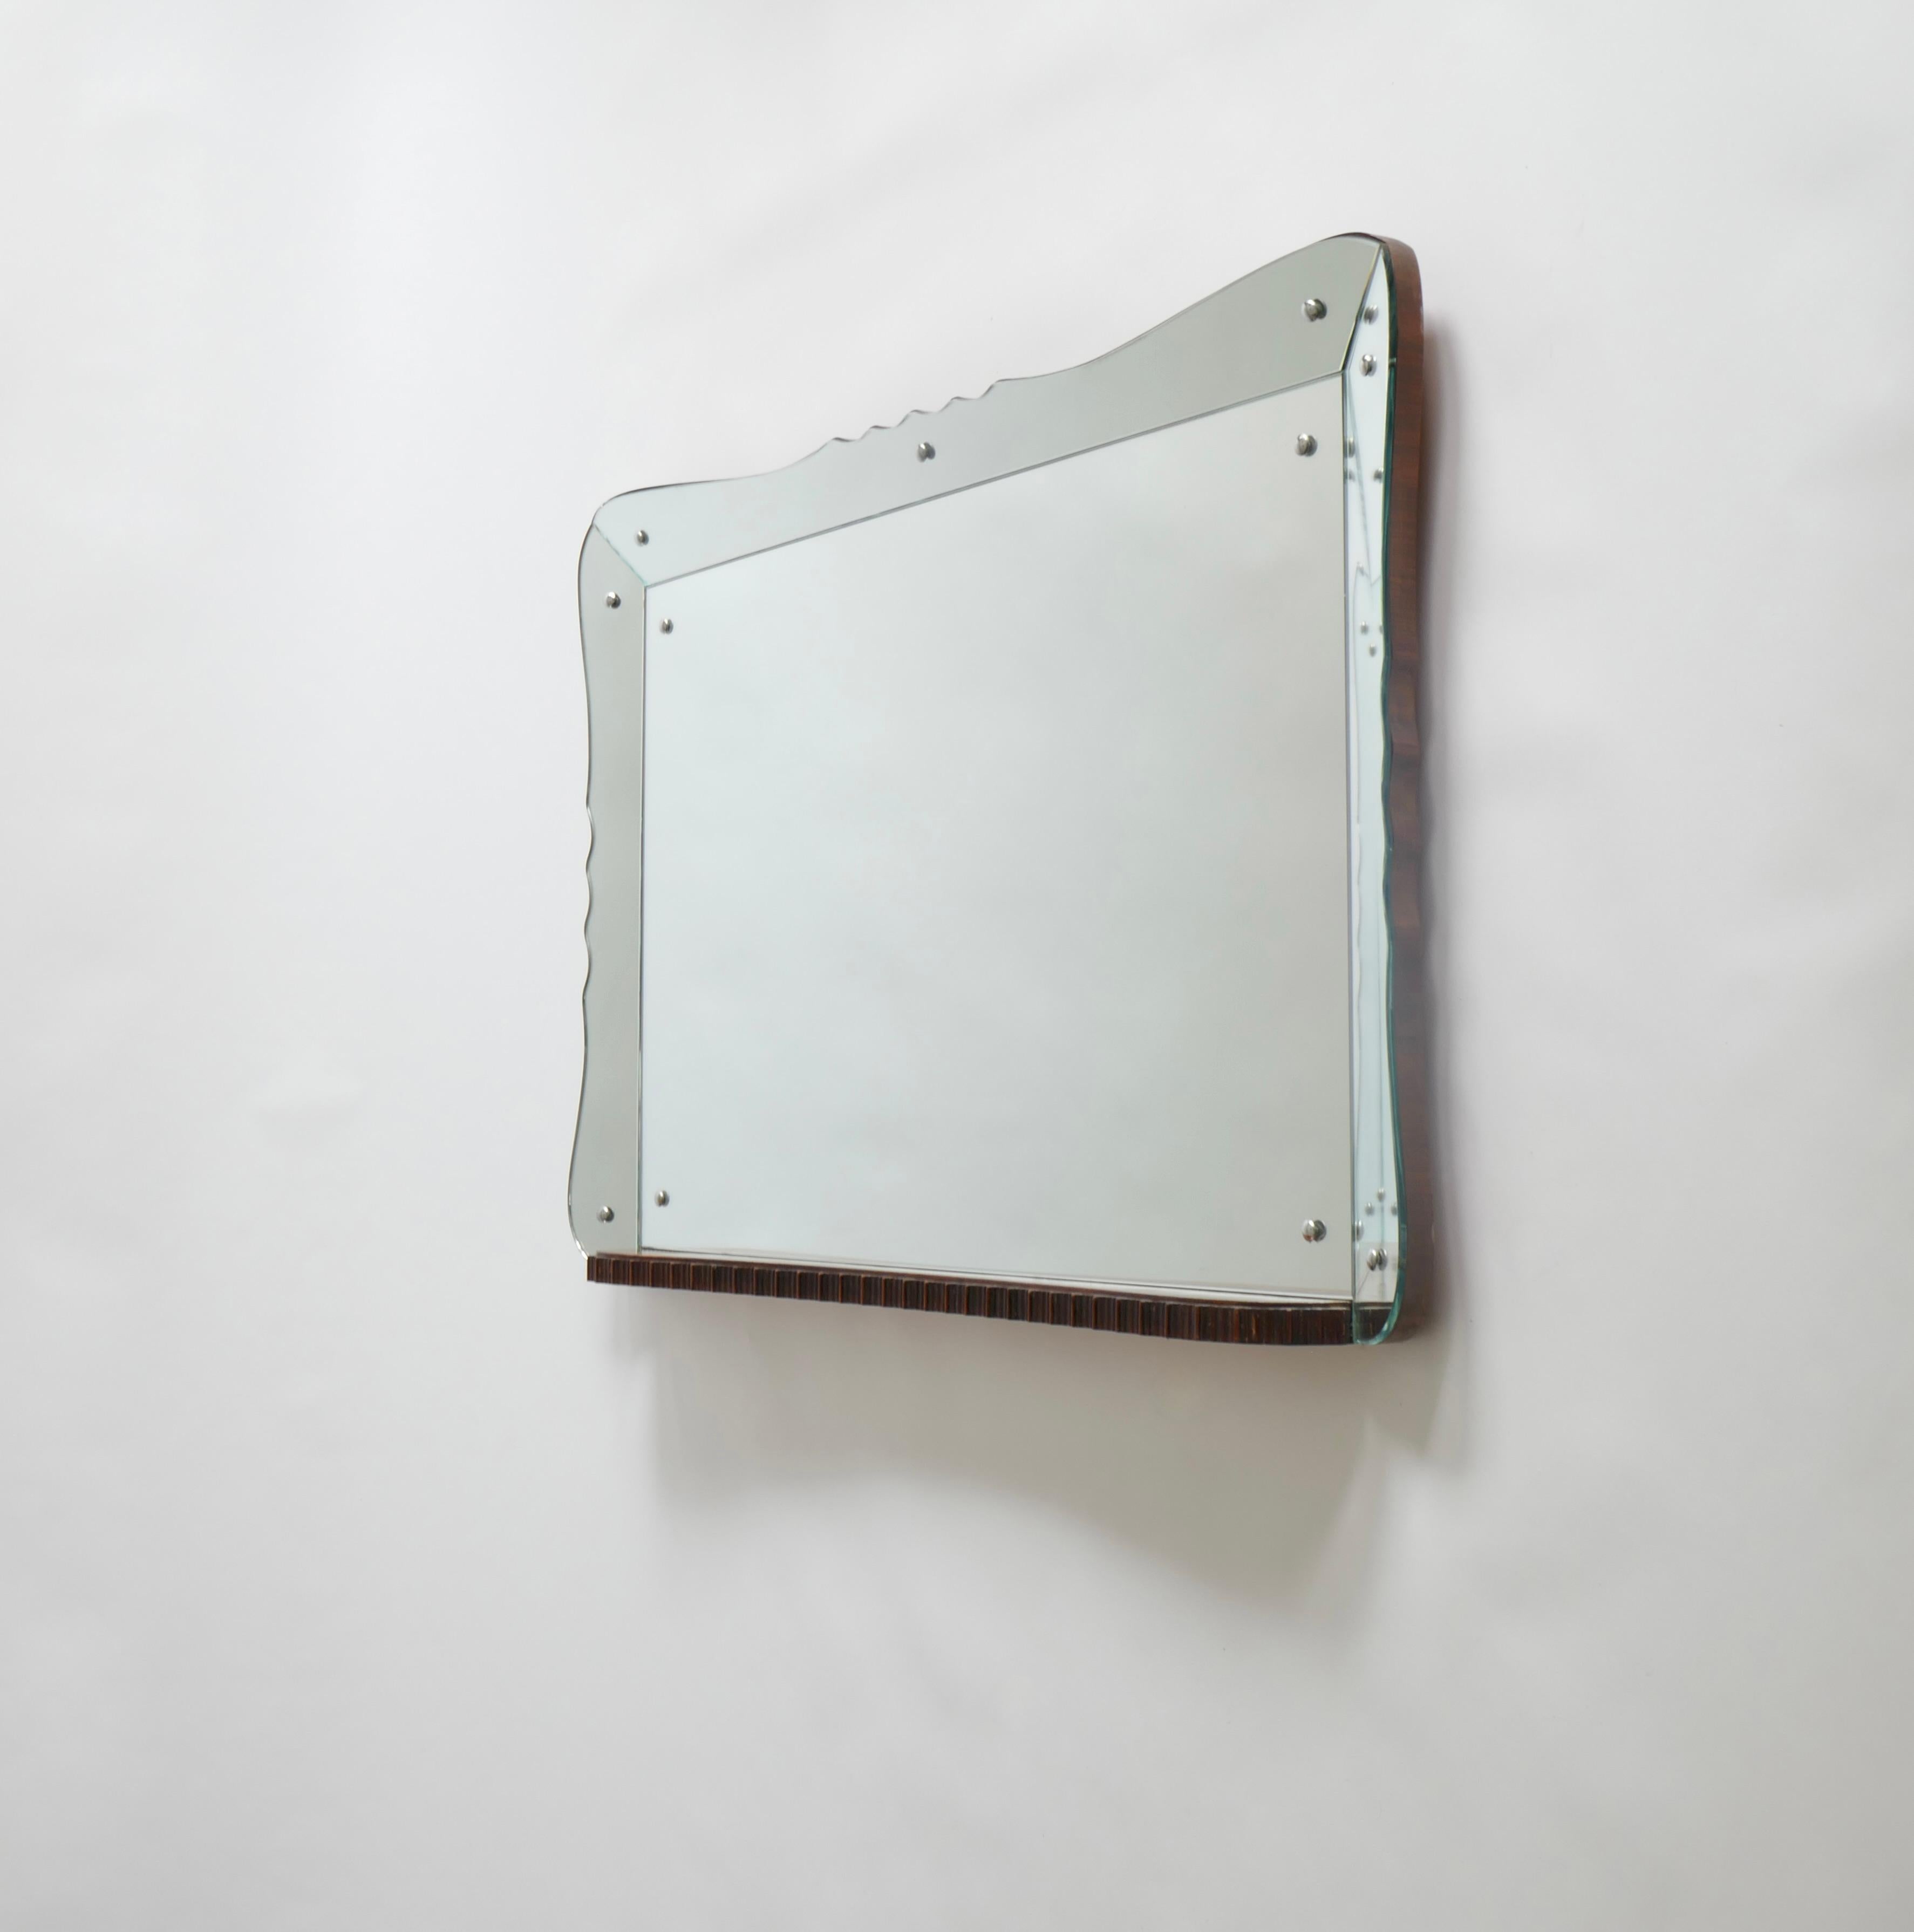 A unique large landscape mirror with a curved angled tray mirror frame. A delicate scallop pattern runs in the centre of the 3 sides of the mirror.
The beautiful wood back panel protrudes at the bottom - which is straight - into a tablet. The